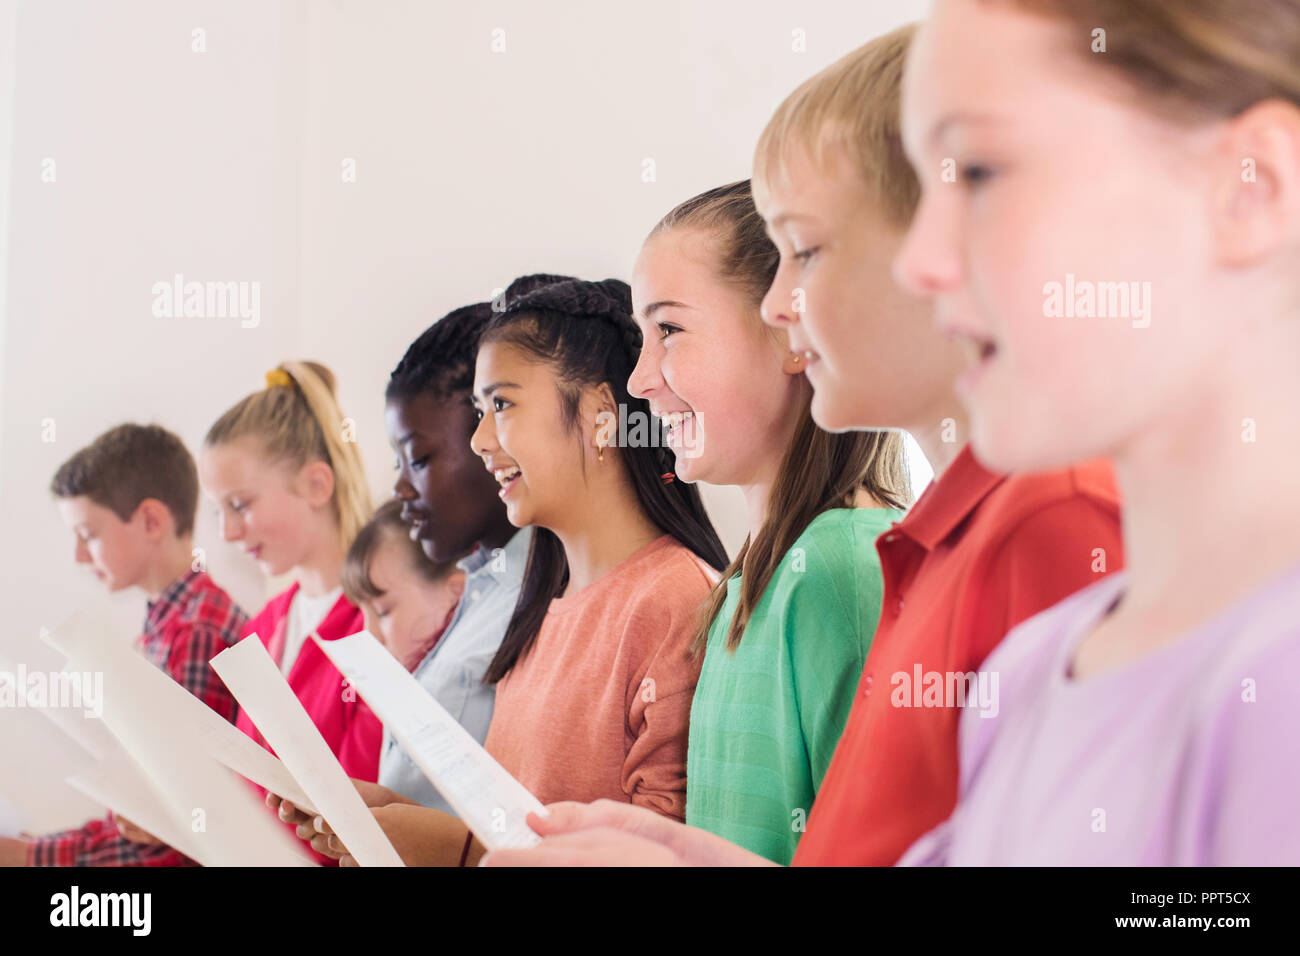 Group Of School Children Singing In Choir Together Stock Photo